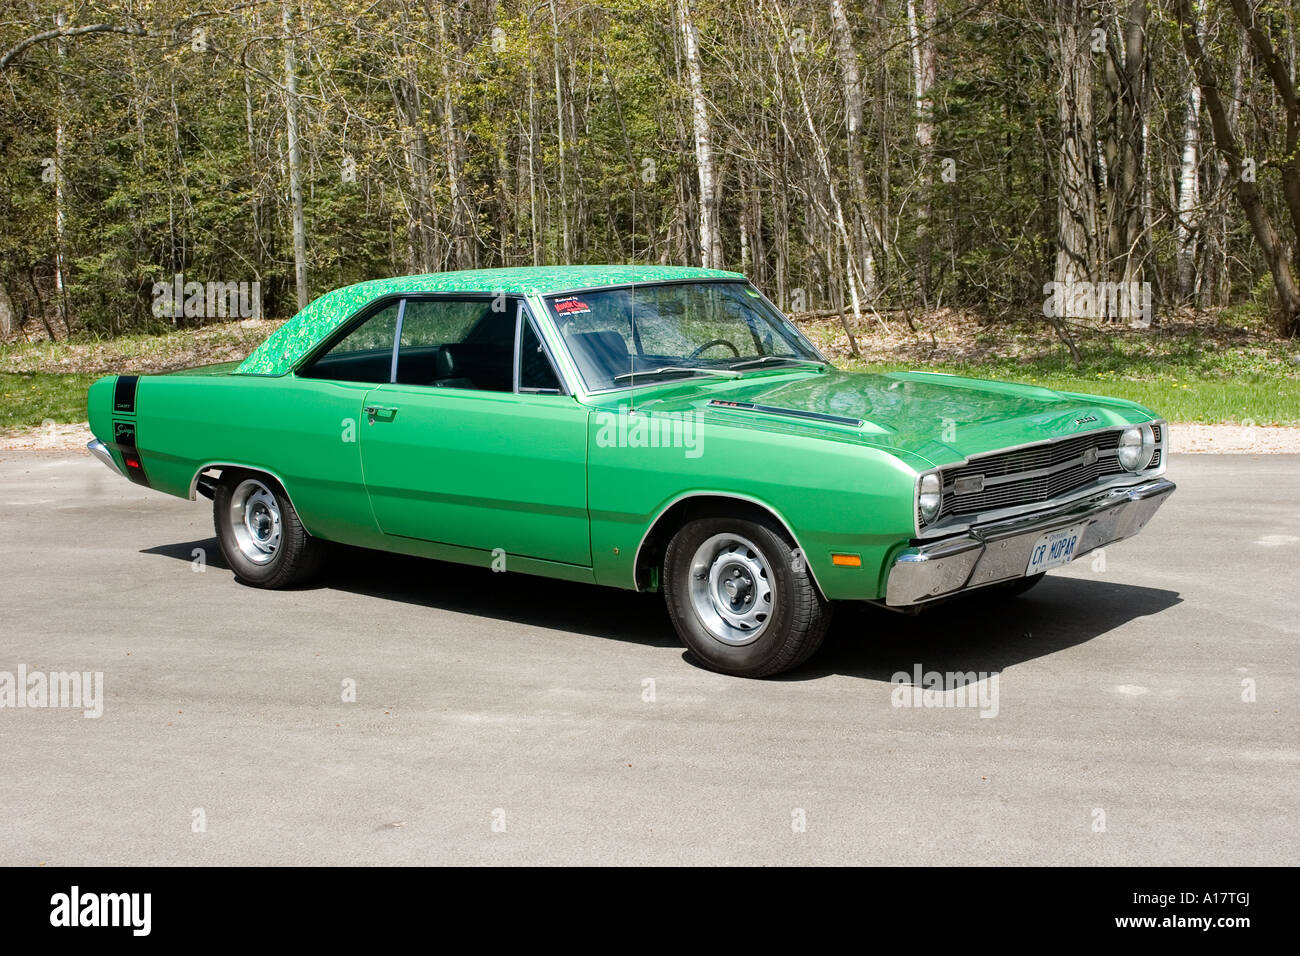 1969 Dodge Dart Swinger with Mod Top option Stock Photo picture image